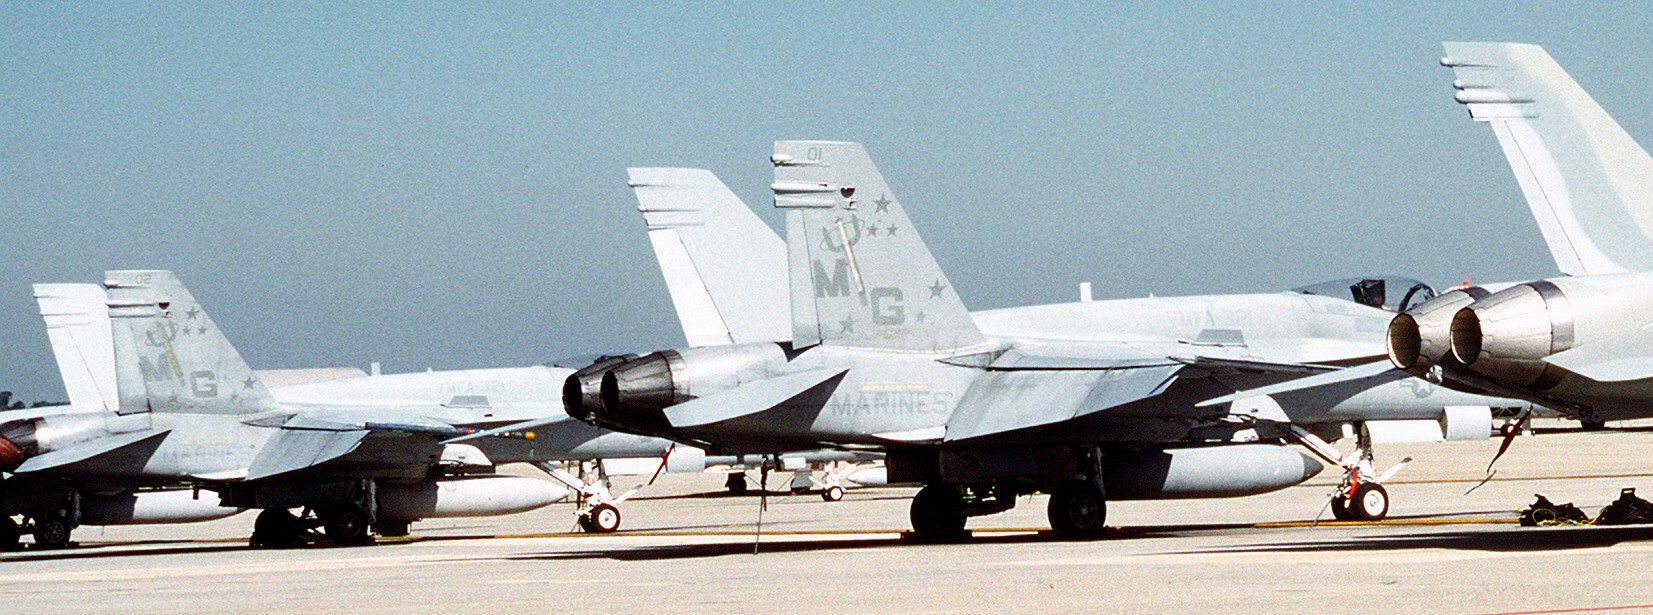 vmfa-321 hell's angels marine fighter attack squadron usmc f/a-18a hornet 16 naf afb andrews